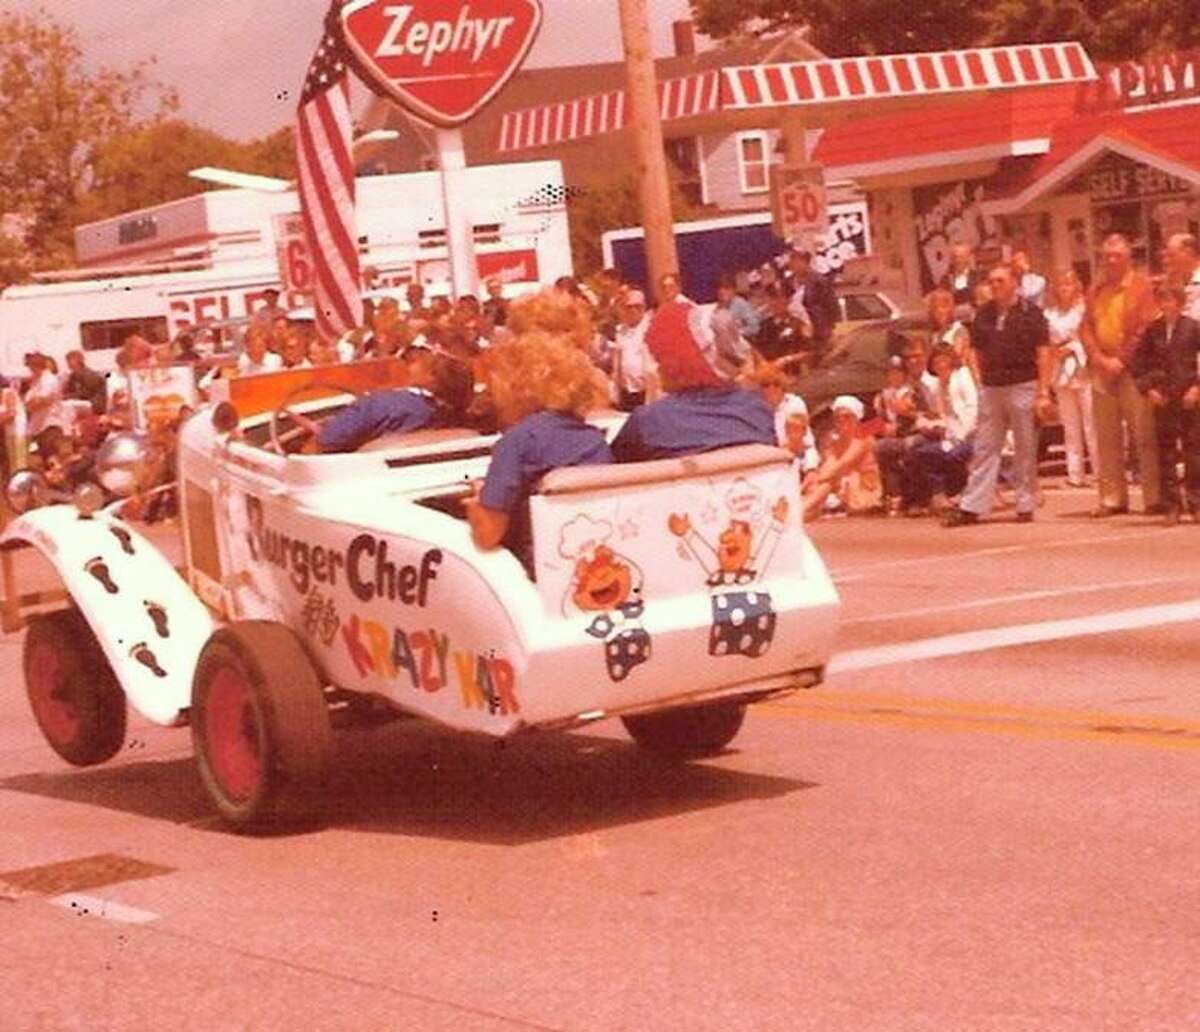 The Burger Chef Krazy Kar was a hit in one of the Manistee National Forest Festival parades in the 1970s.